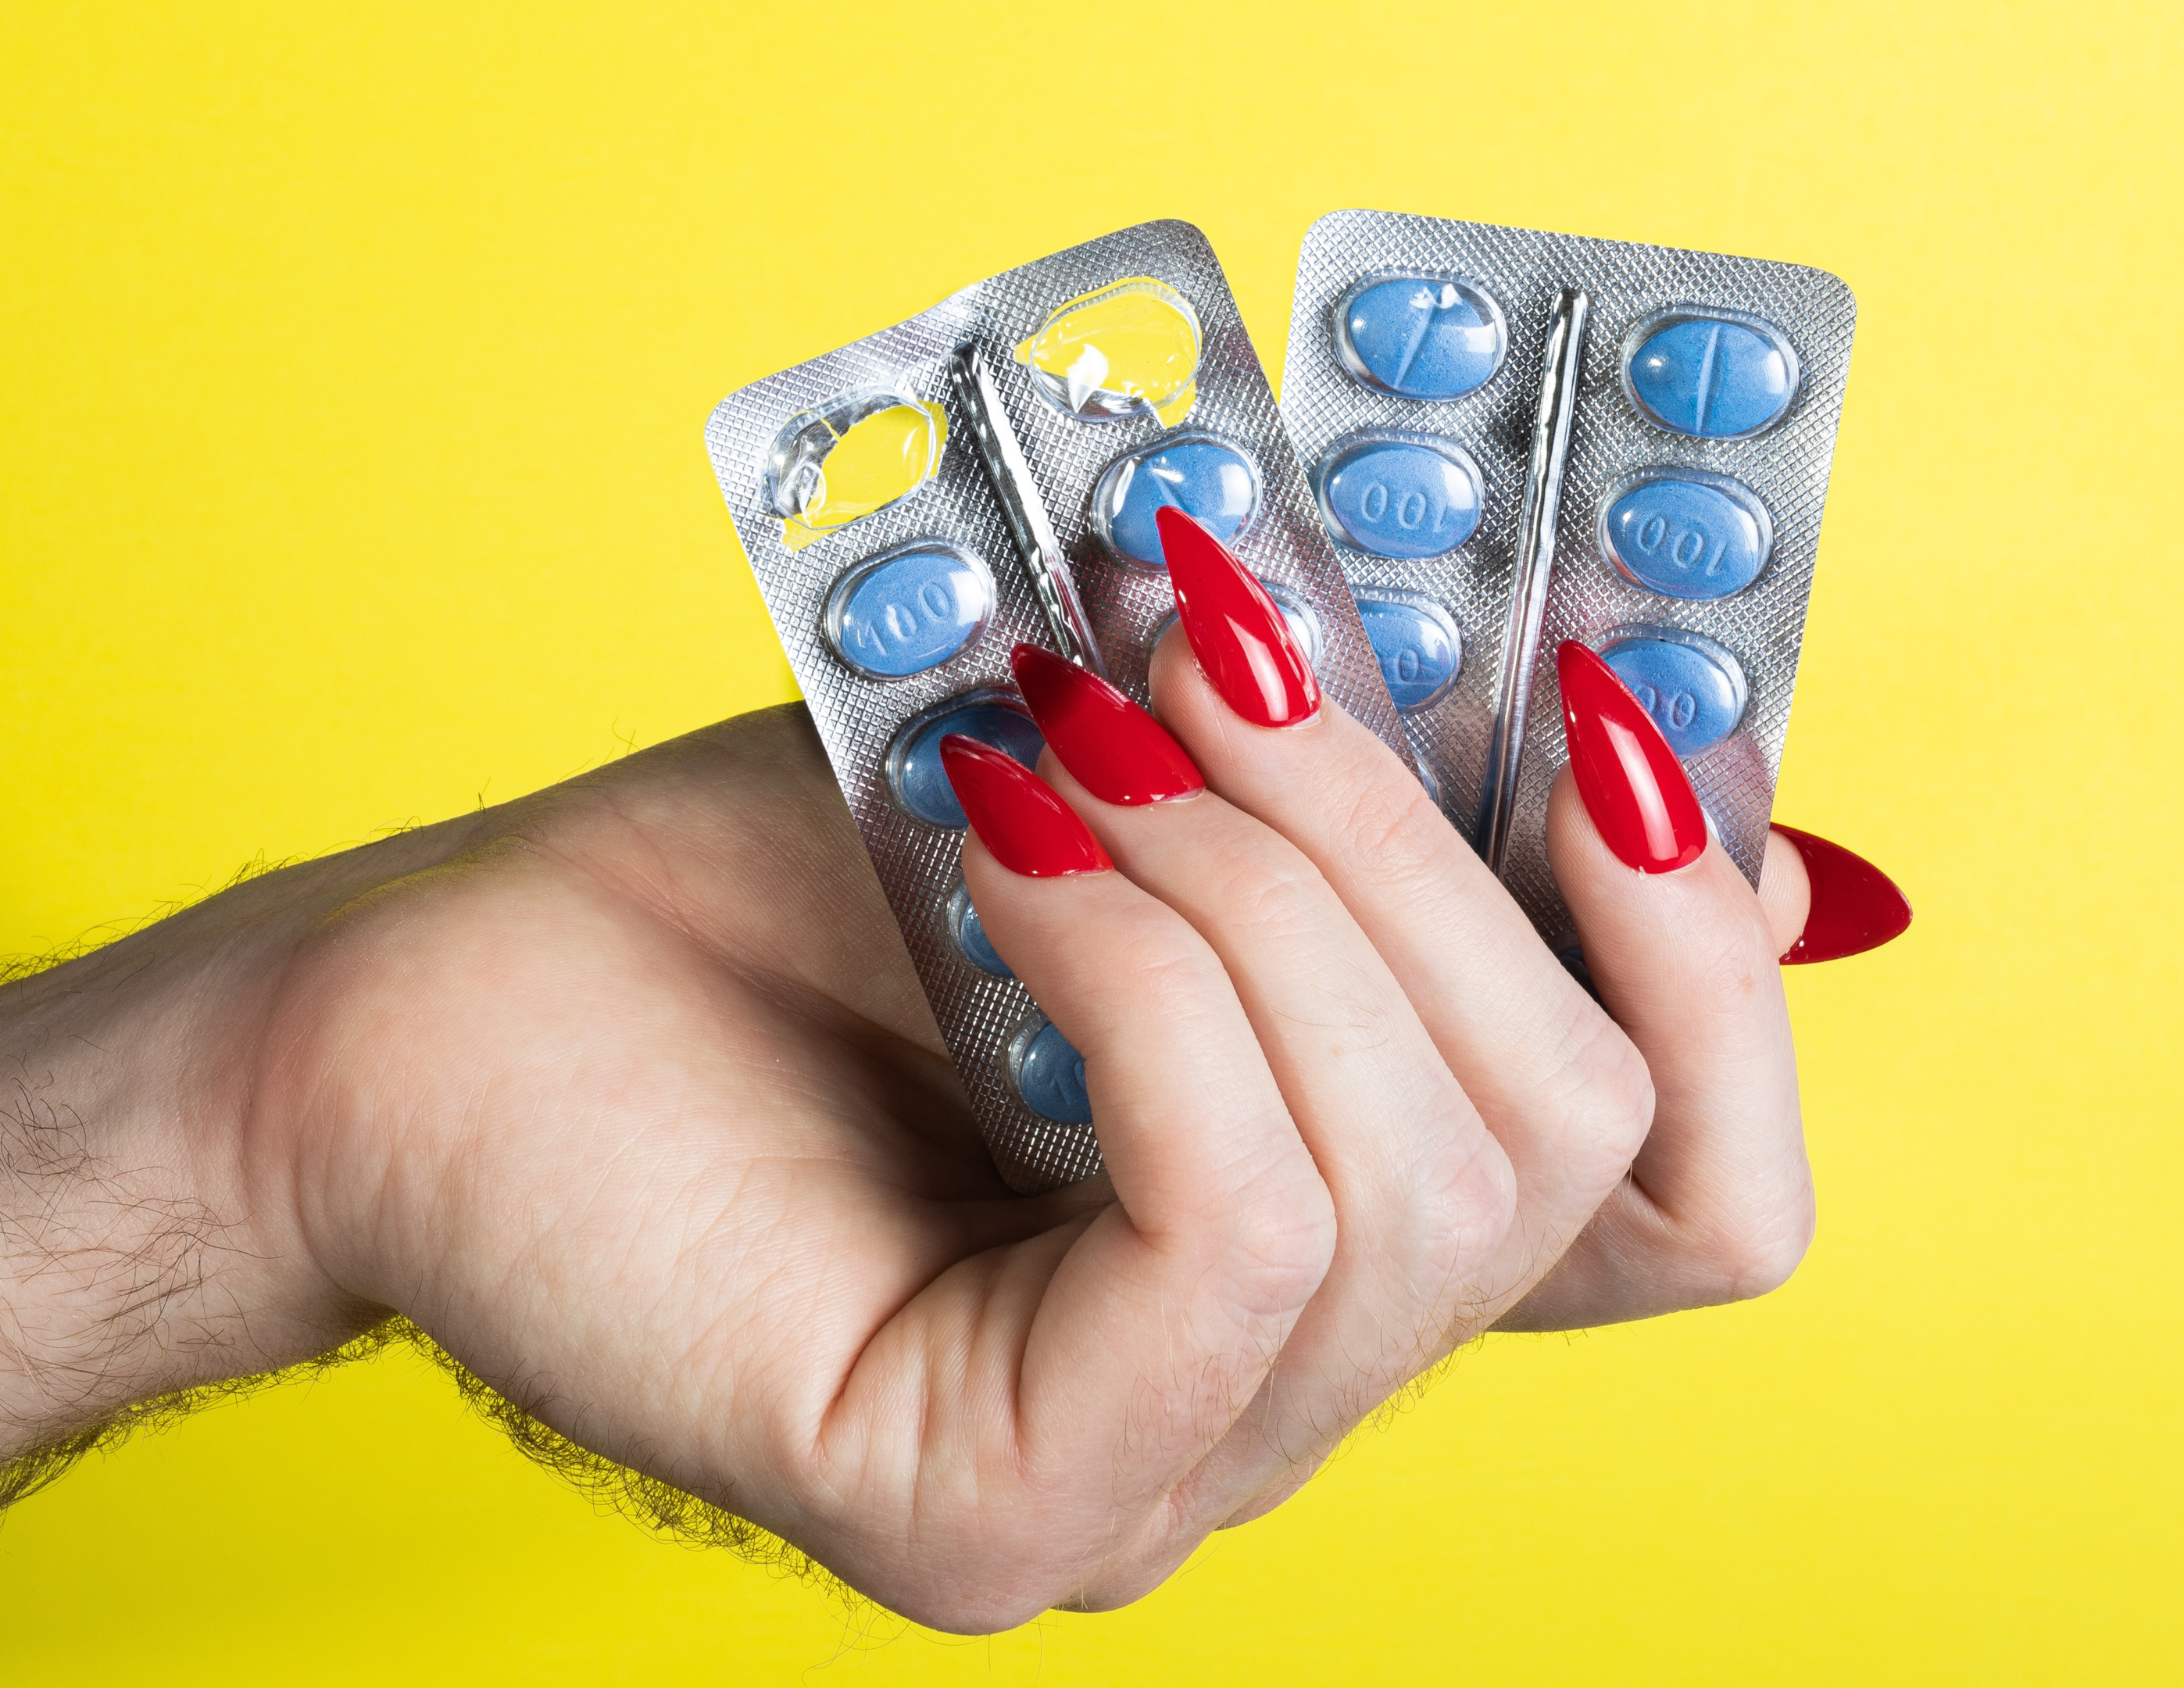 buy viagra connect online ed medication and ed treatments